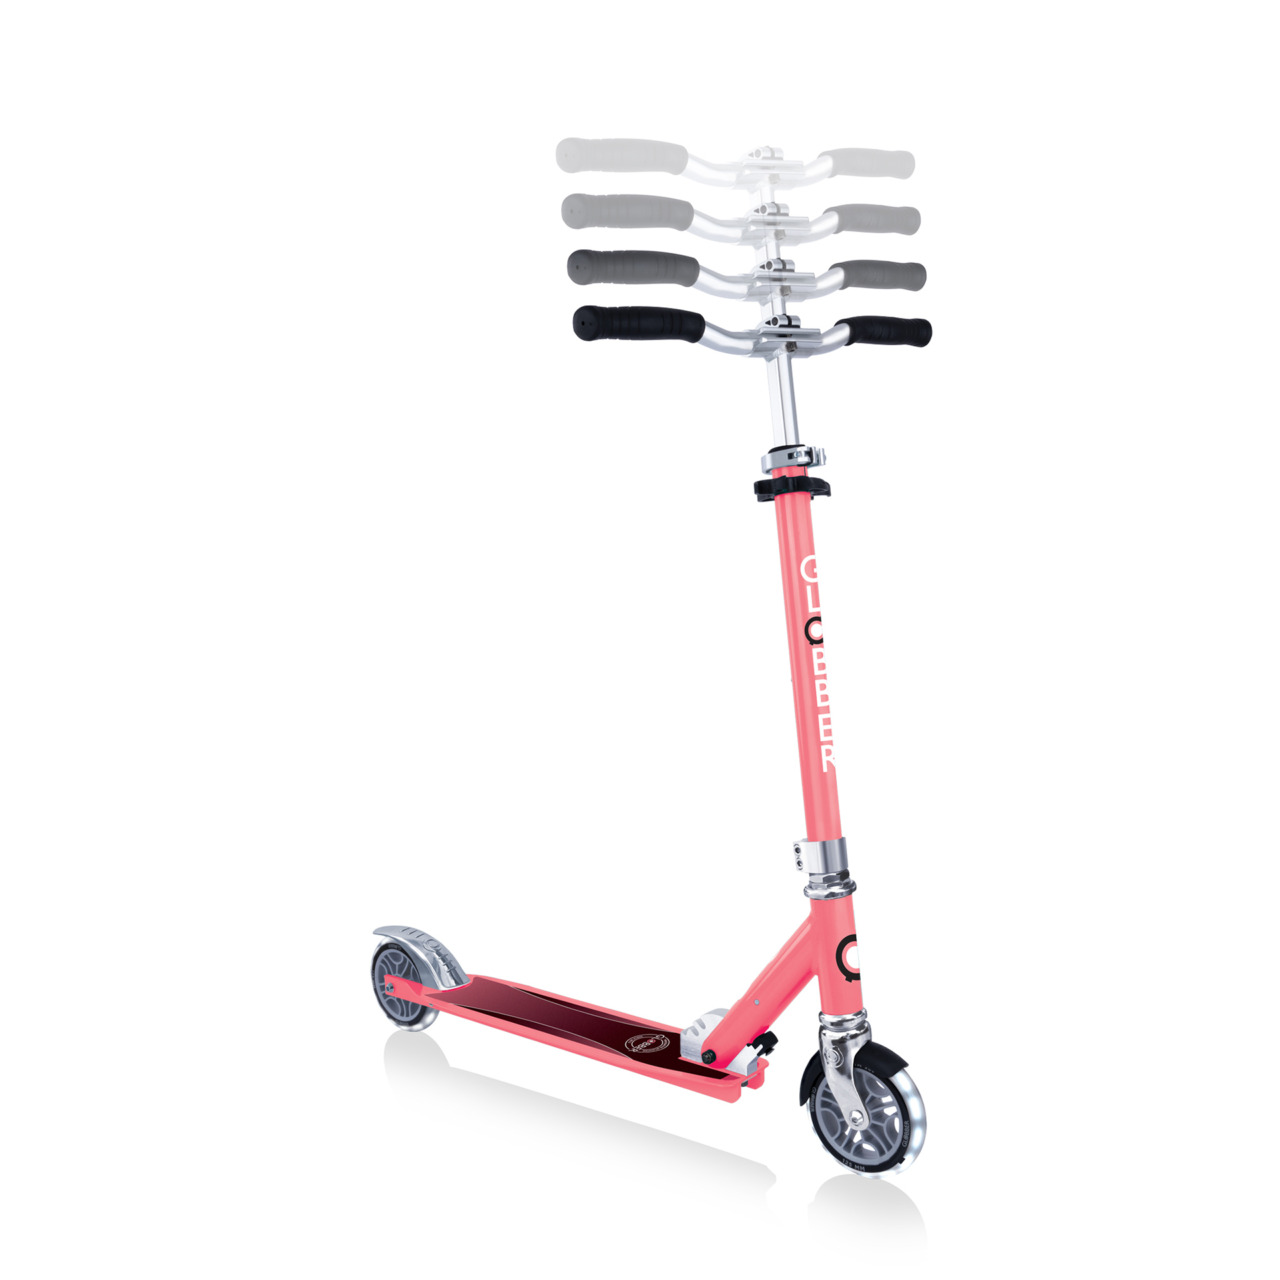 721 177 Height Adjustable Light Up Scooter